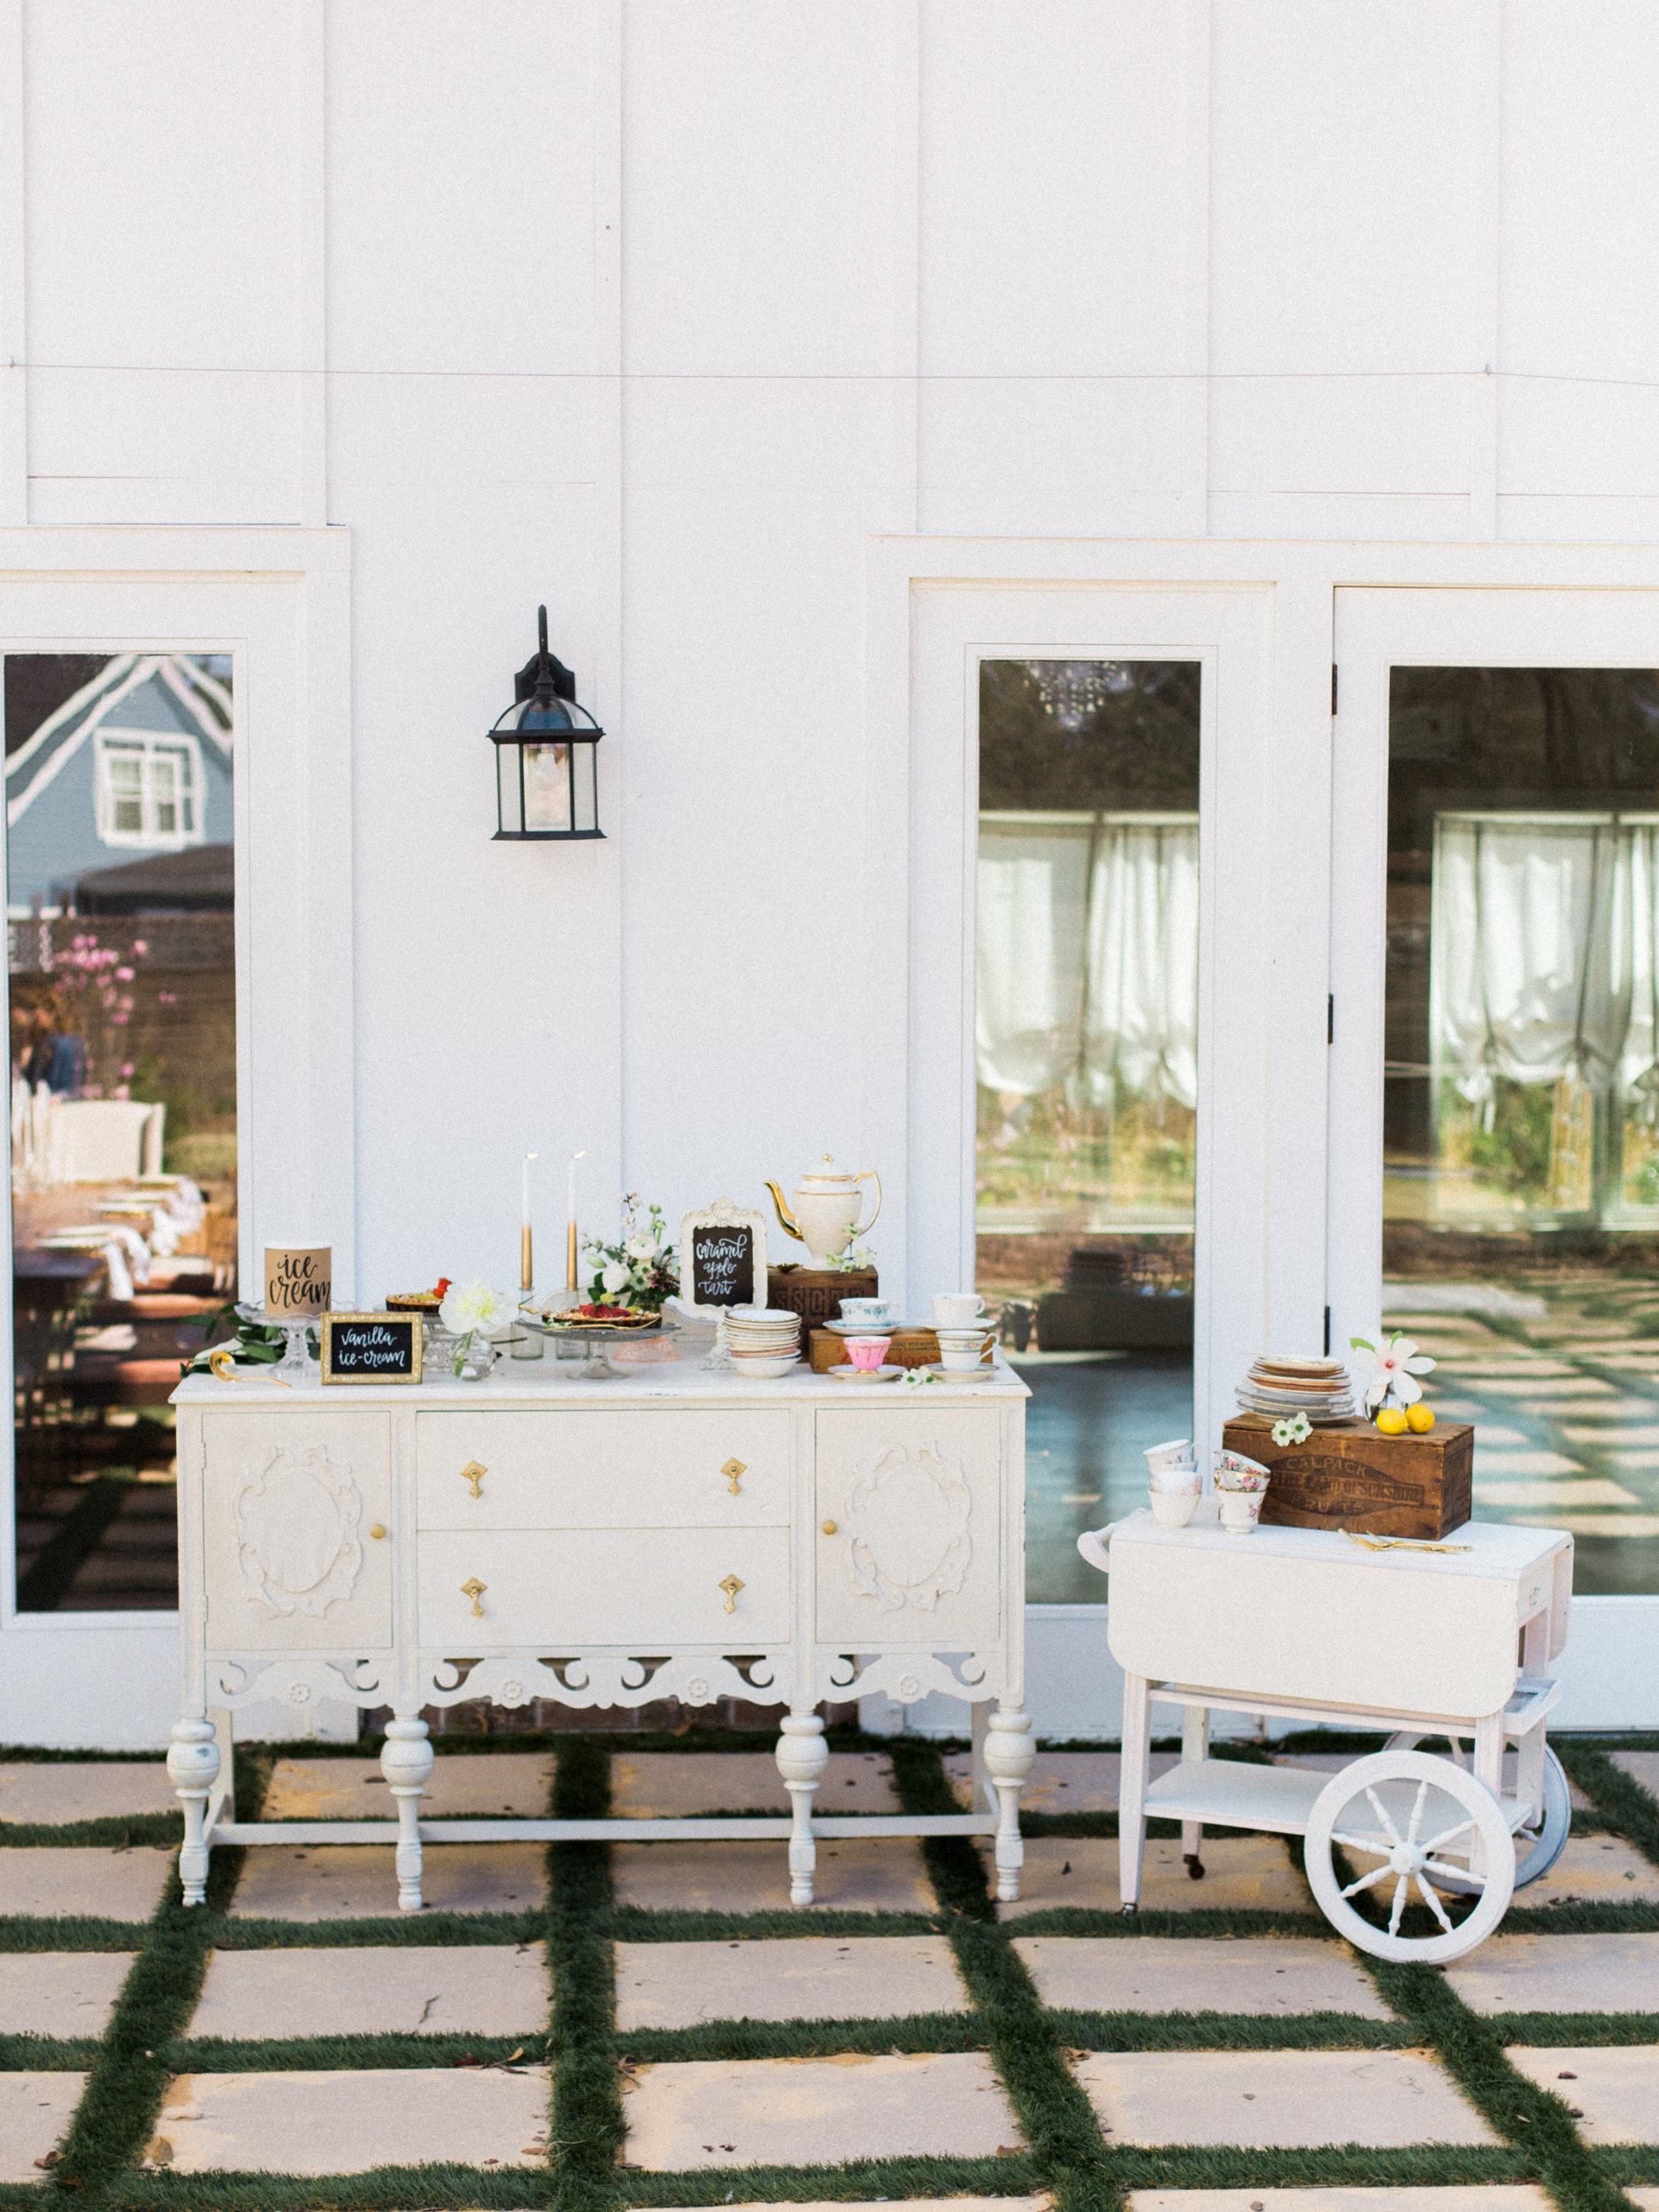 Outdoor Styled Southern Dinner Party - Behind-the-Scenes of a Styled Shoot (Dessert Station)